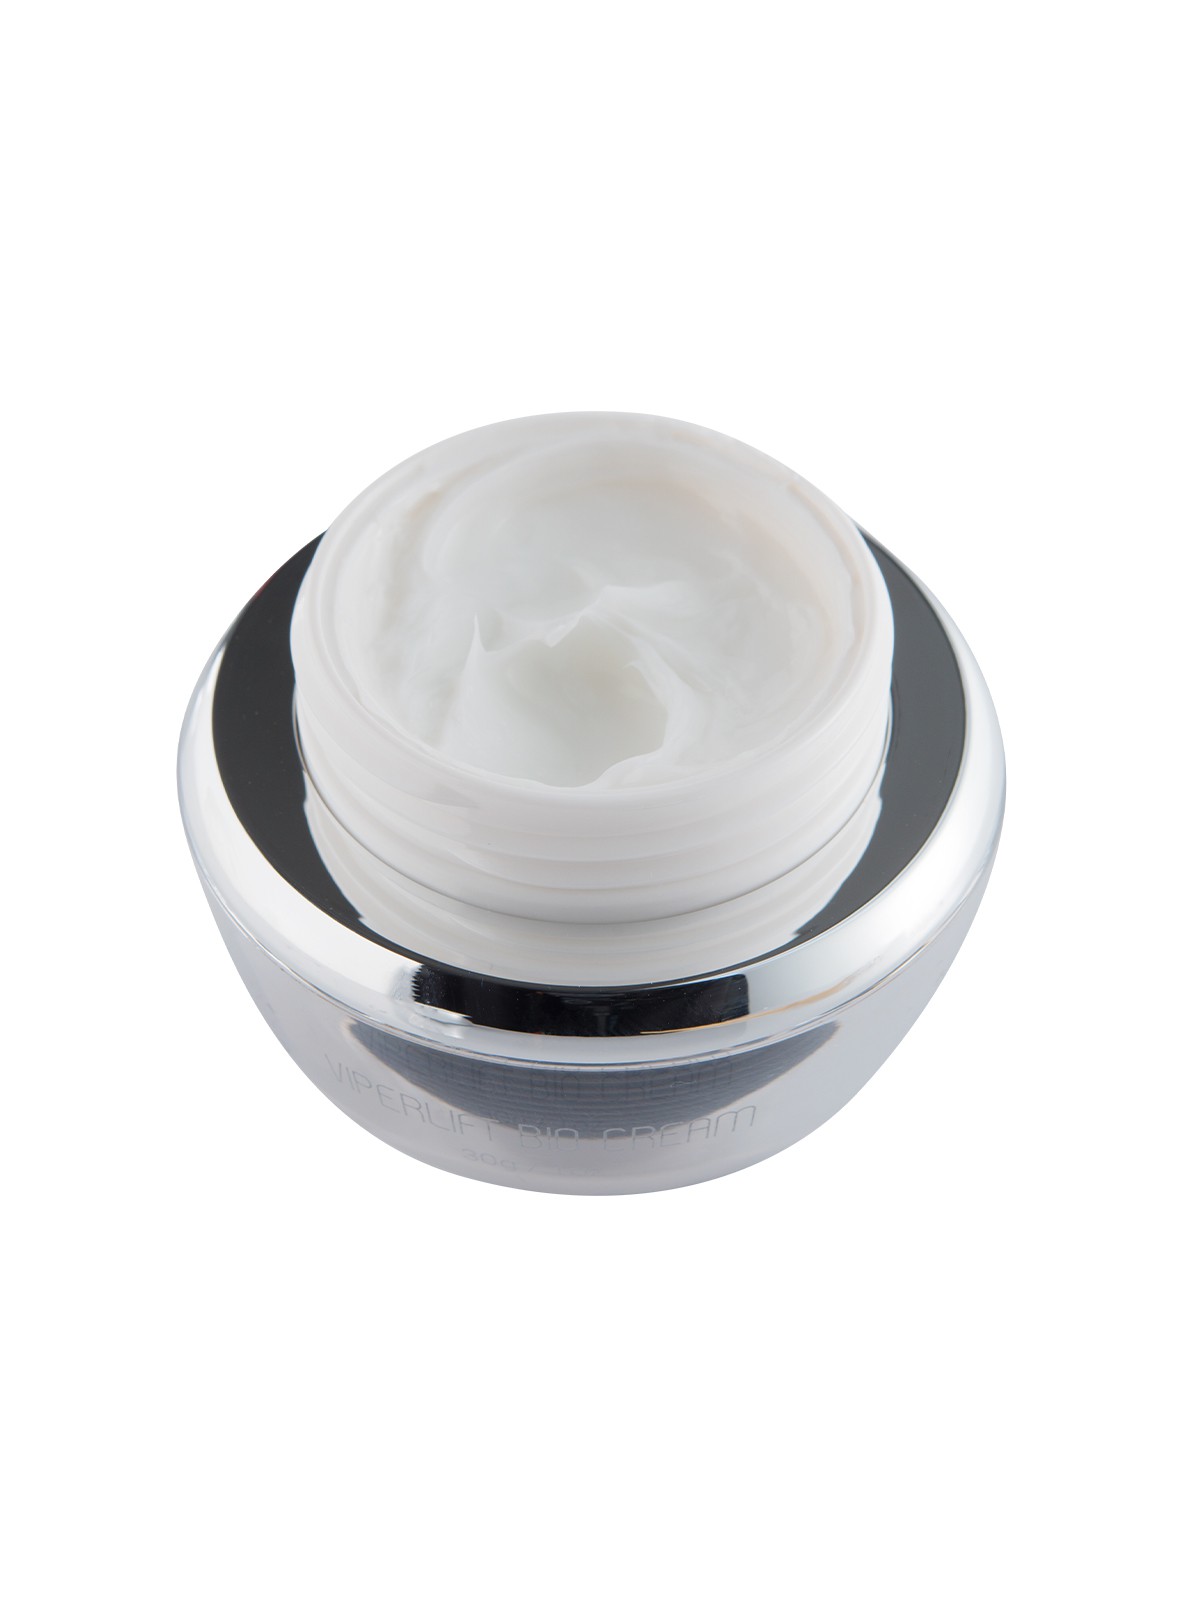 ViperLift Bio Cream with removed lid